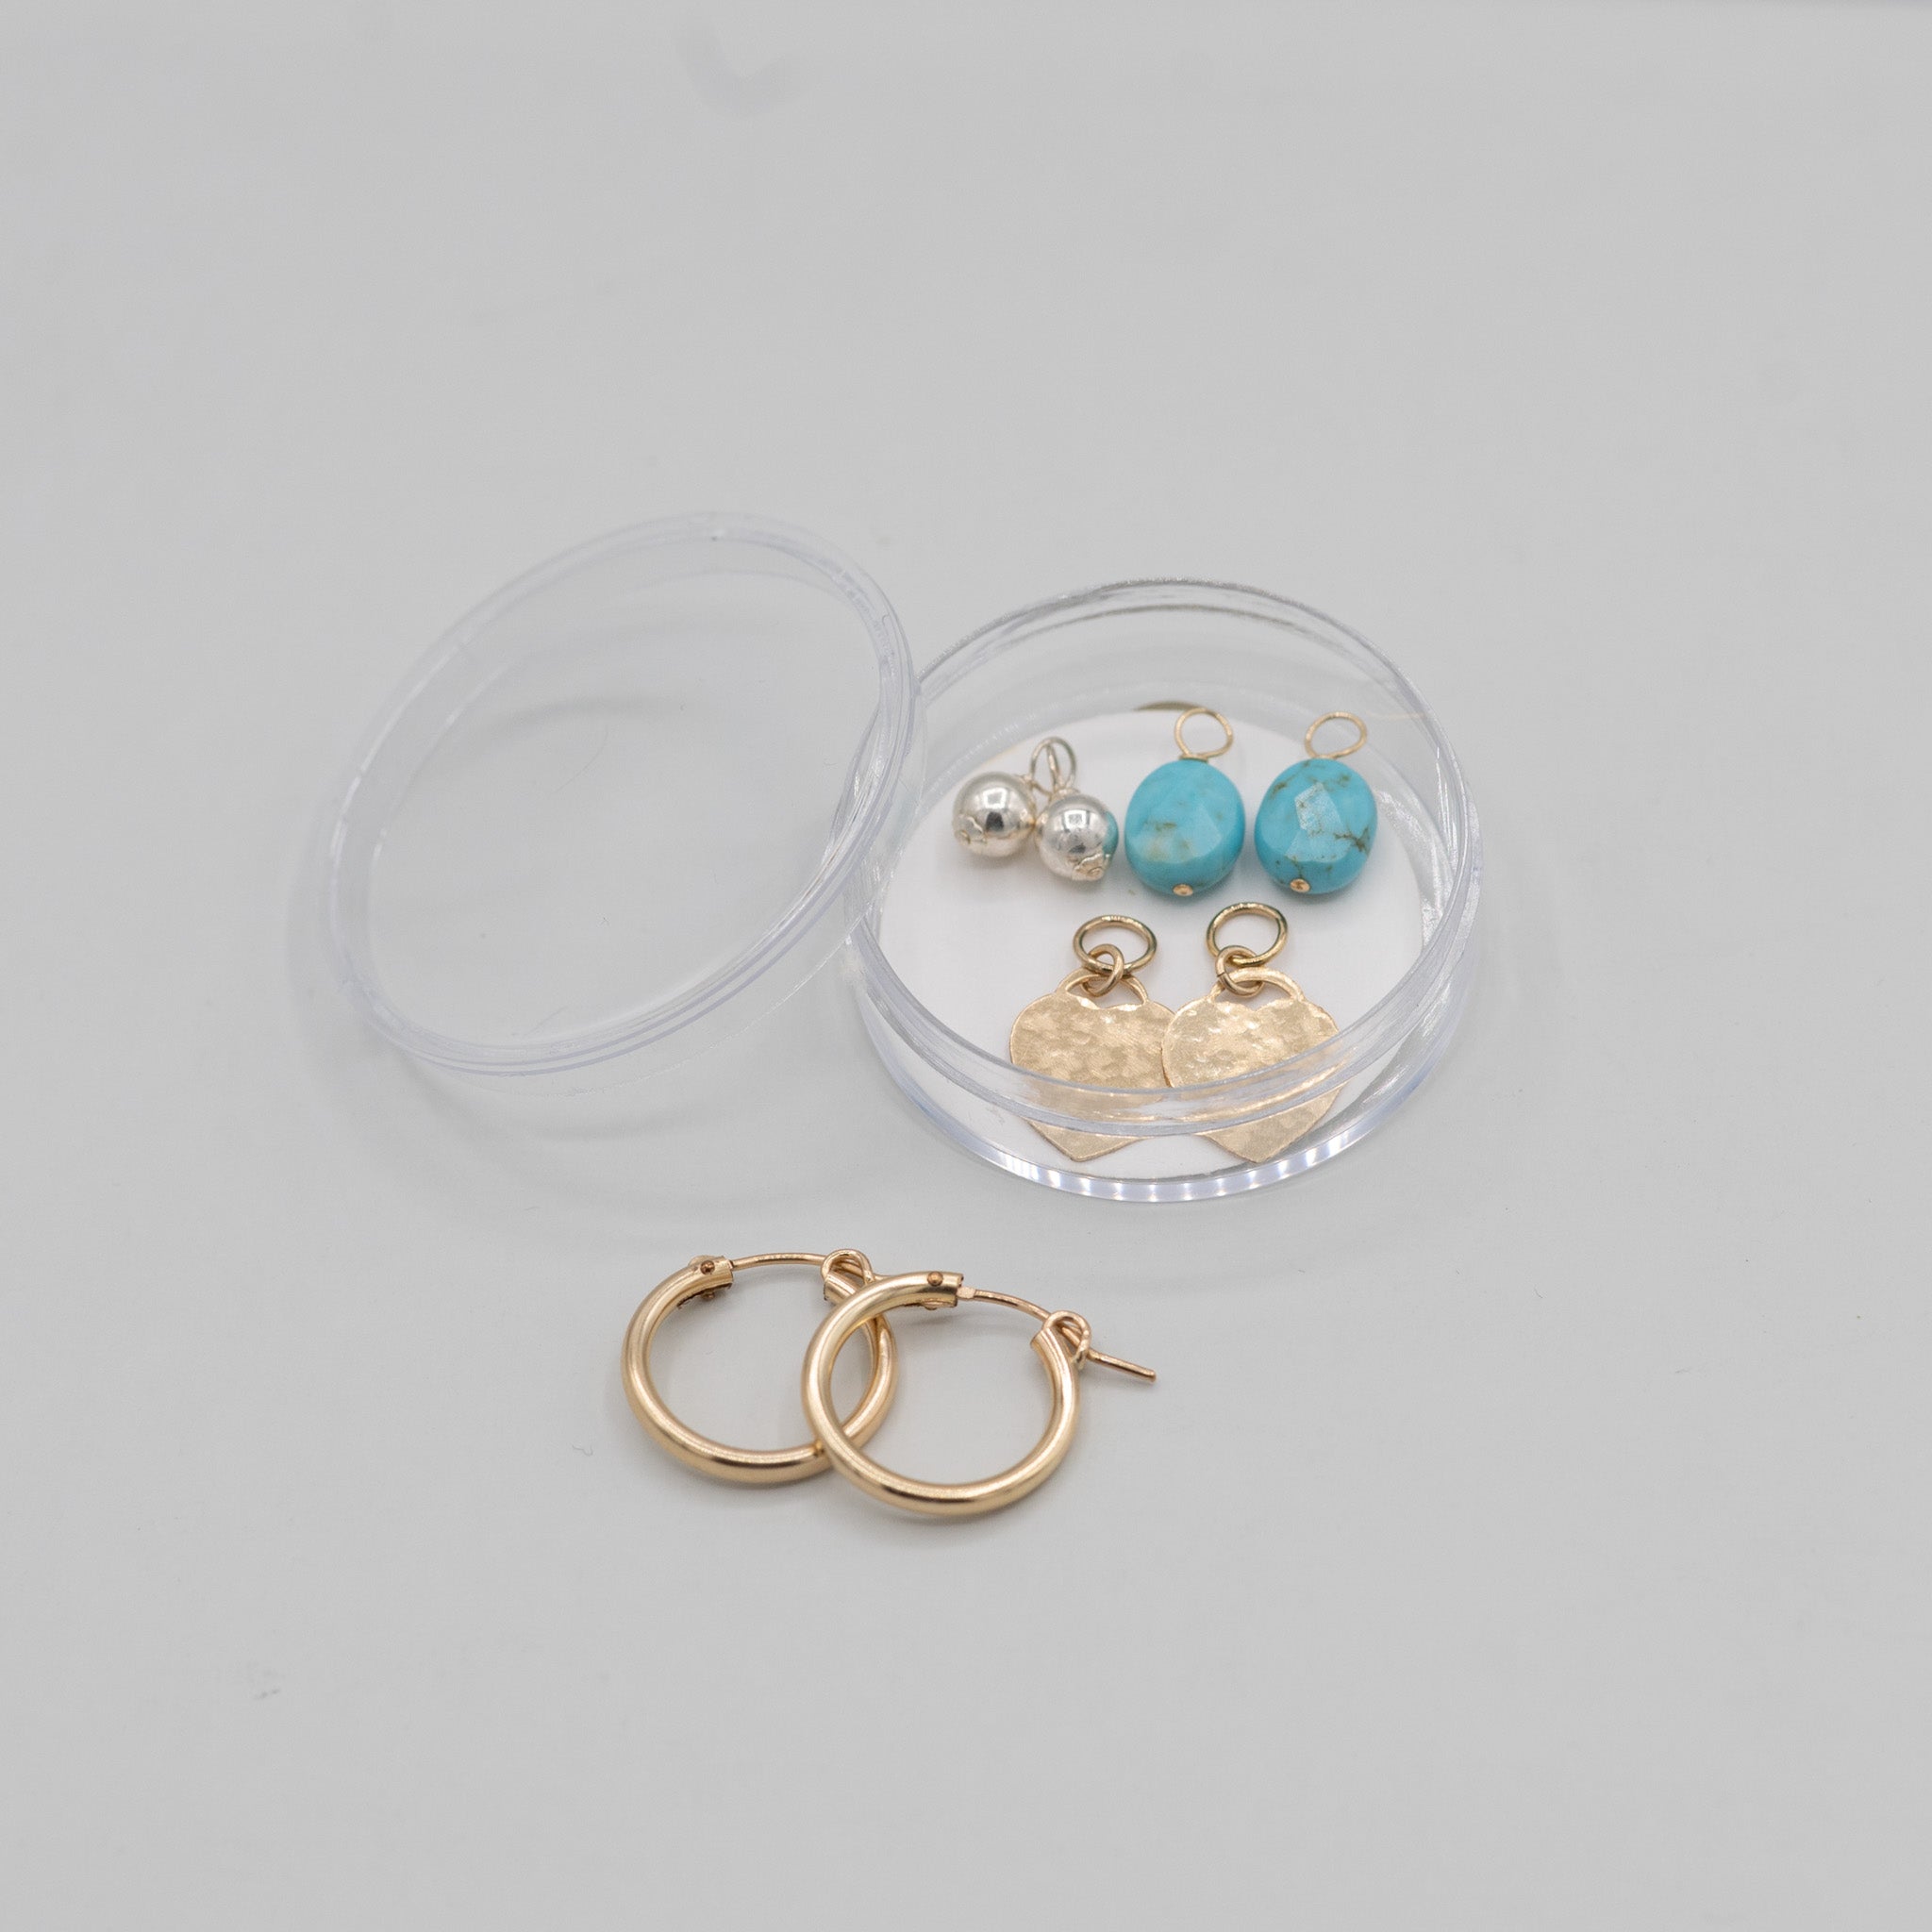 Small 14k Gold Filled Tube Hoops